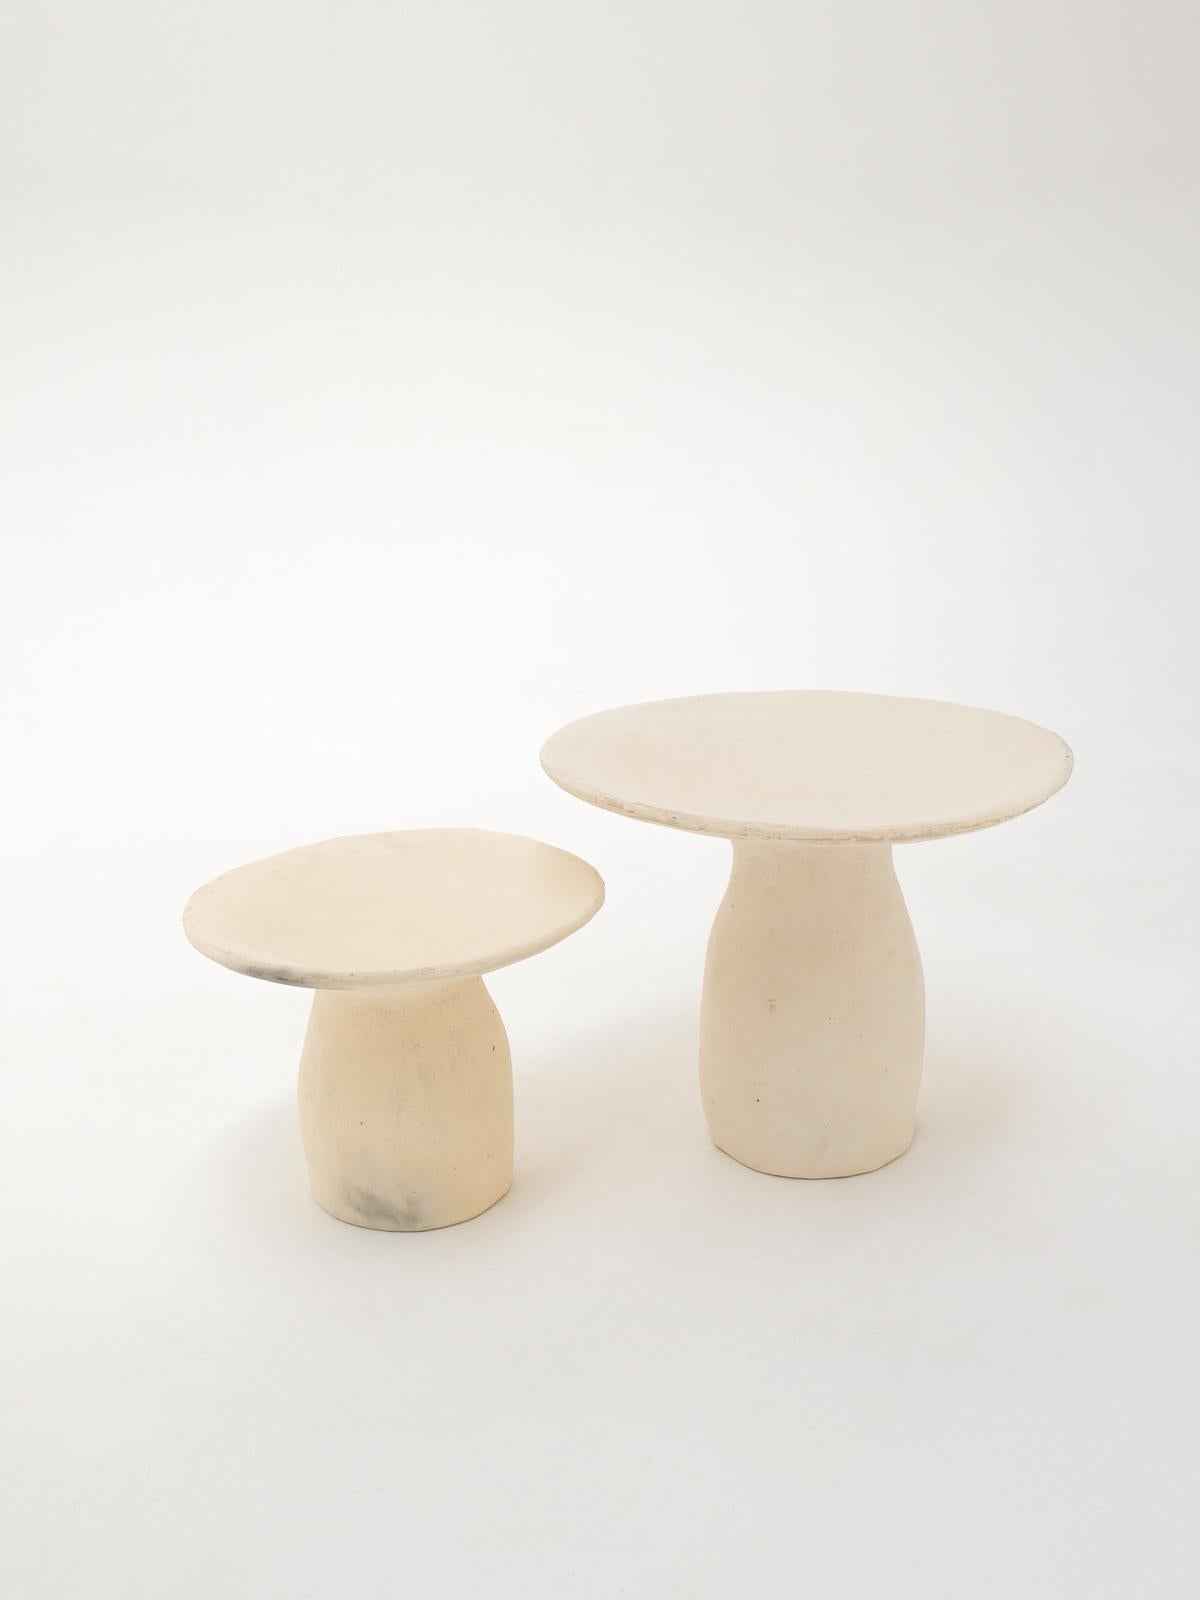 Arts and Crafts White Side Tables Made of local Clay, natural pigments, Handcrafted